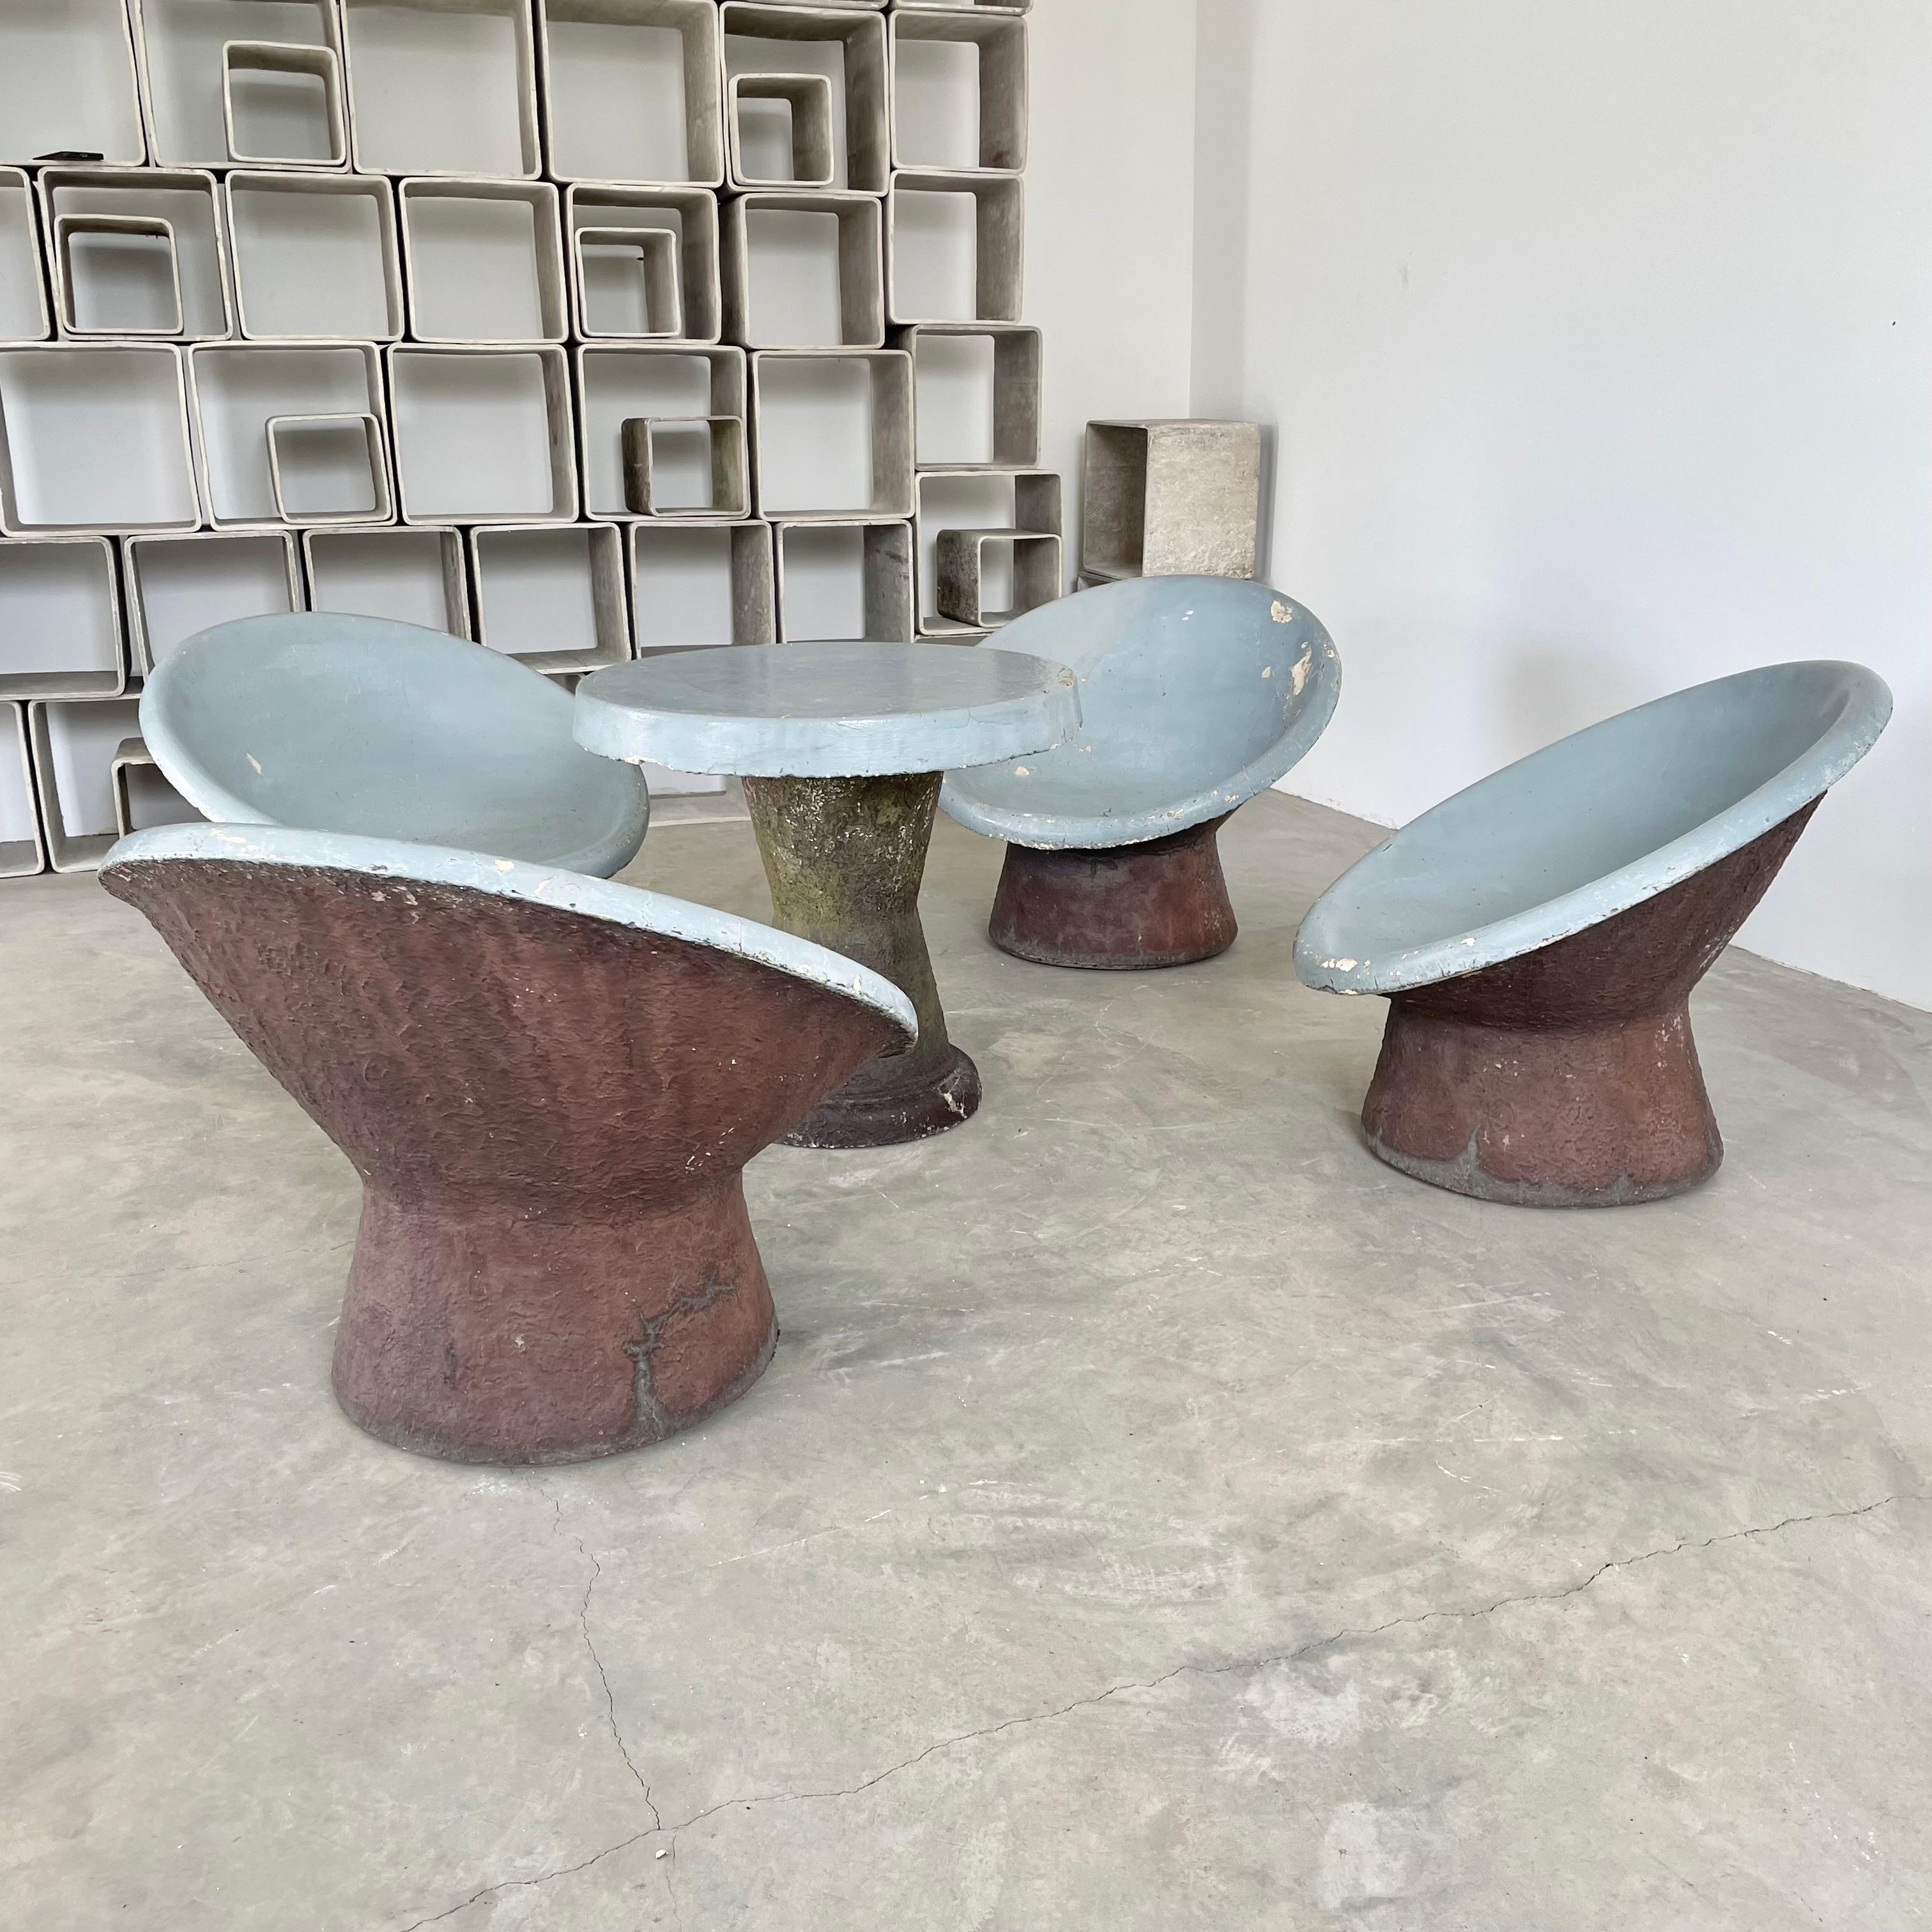 Hand-Crafted Sculptural Concrete Chairs and Table, 1960s, Switzerland For Sale